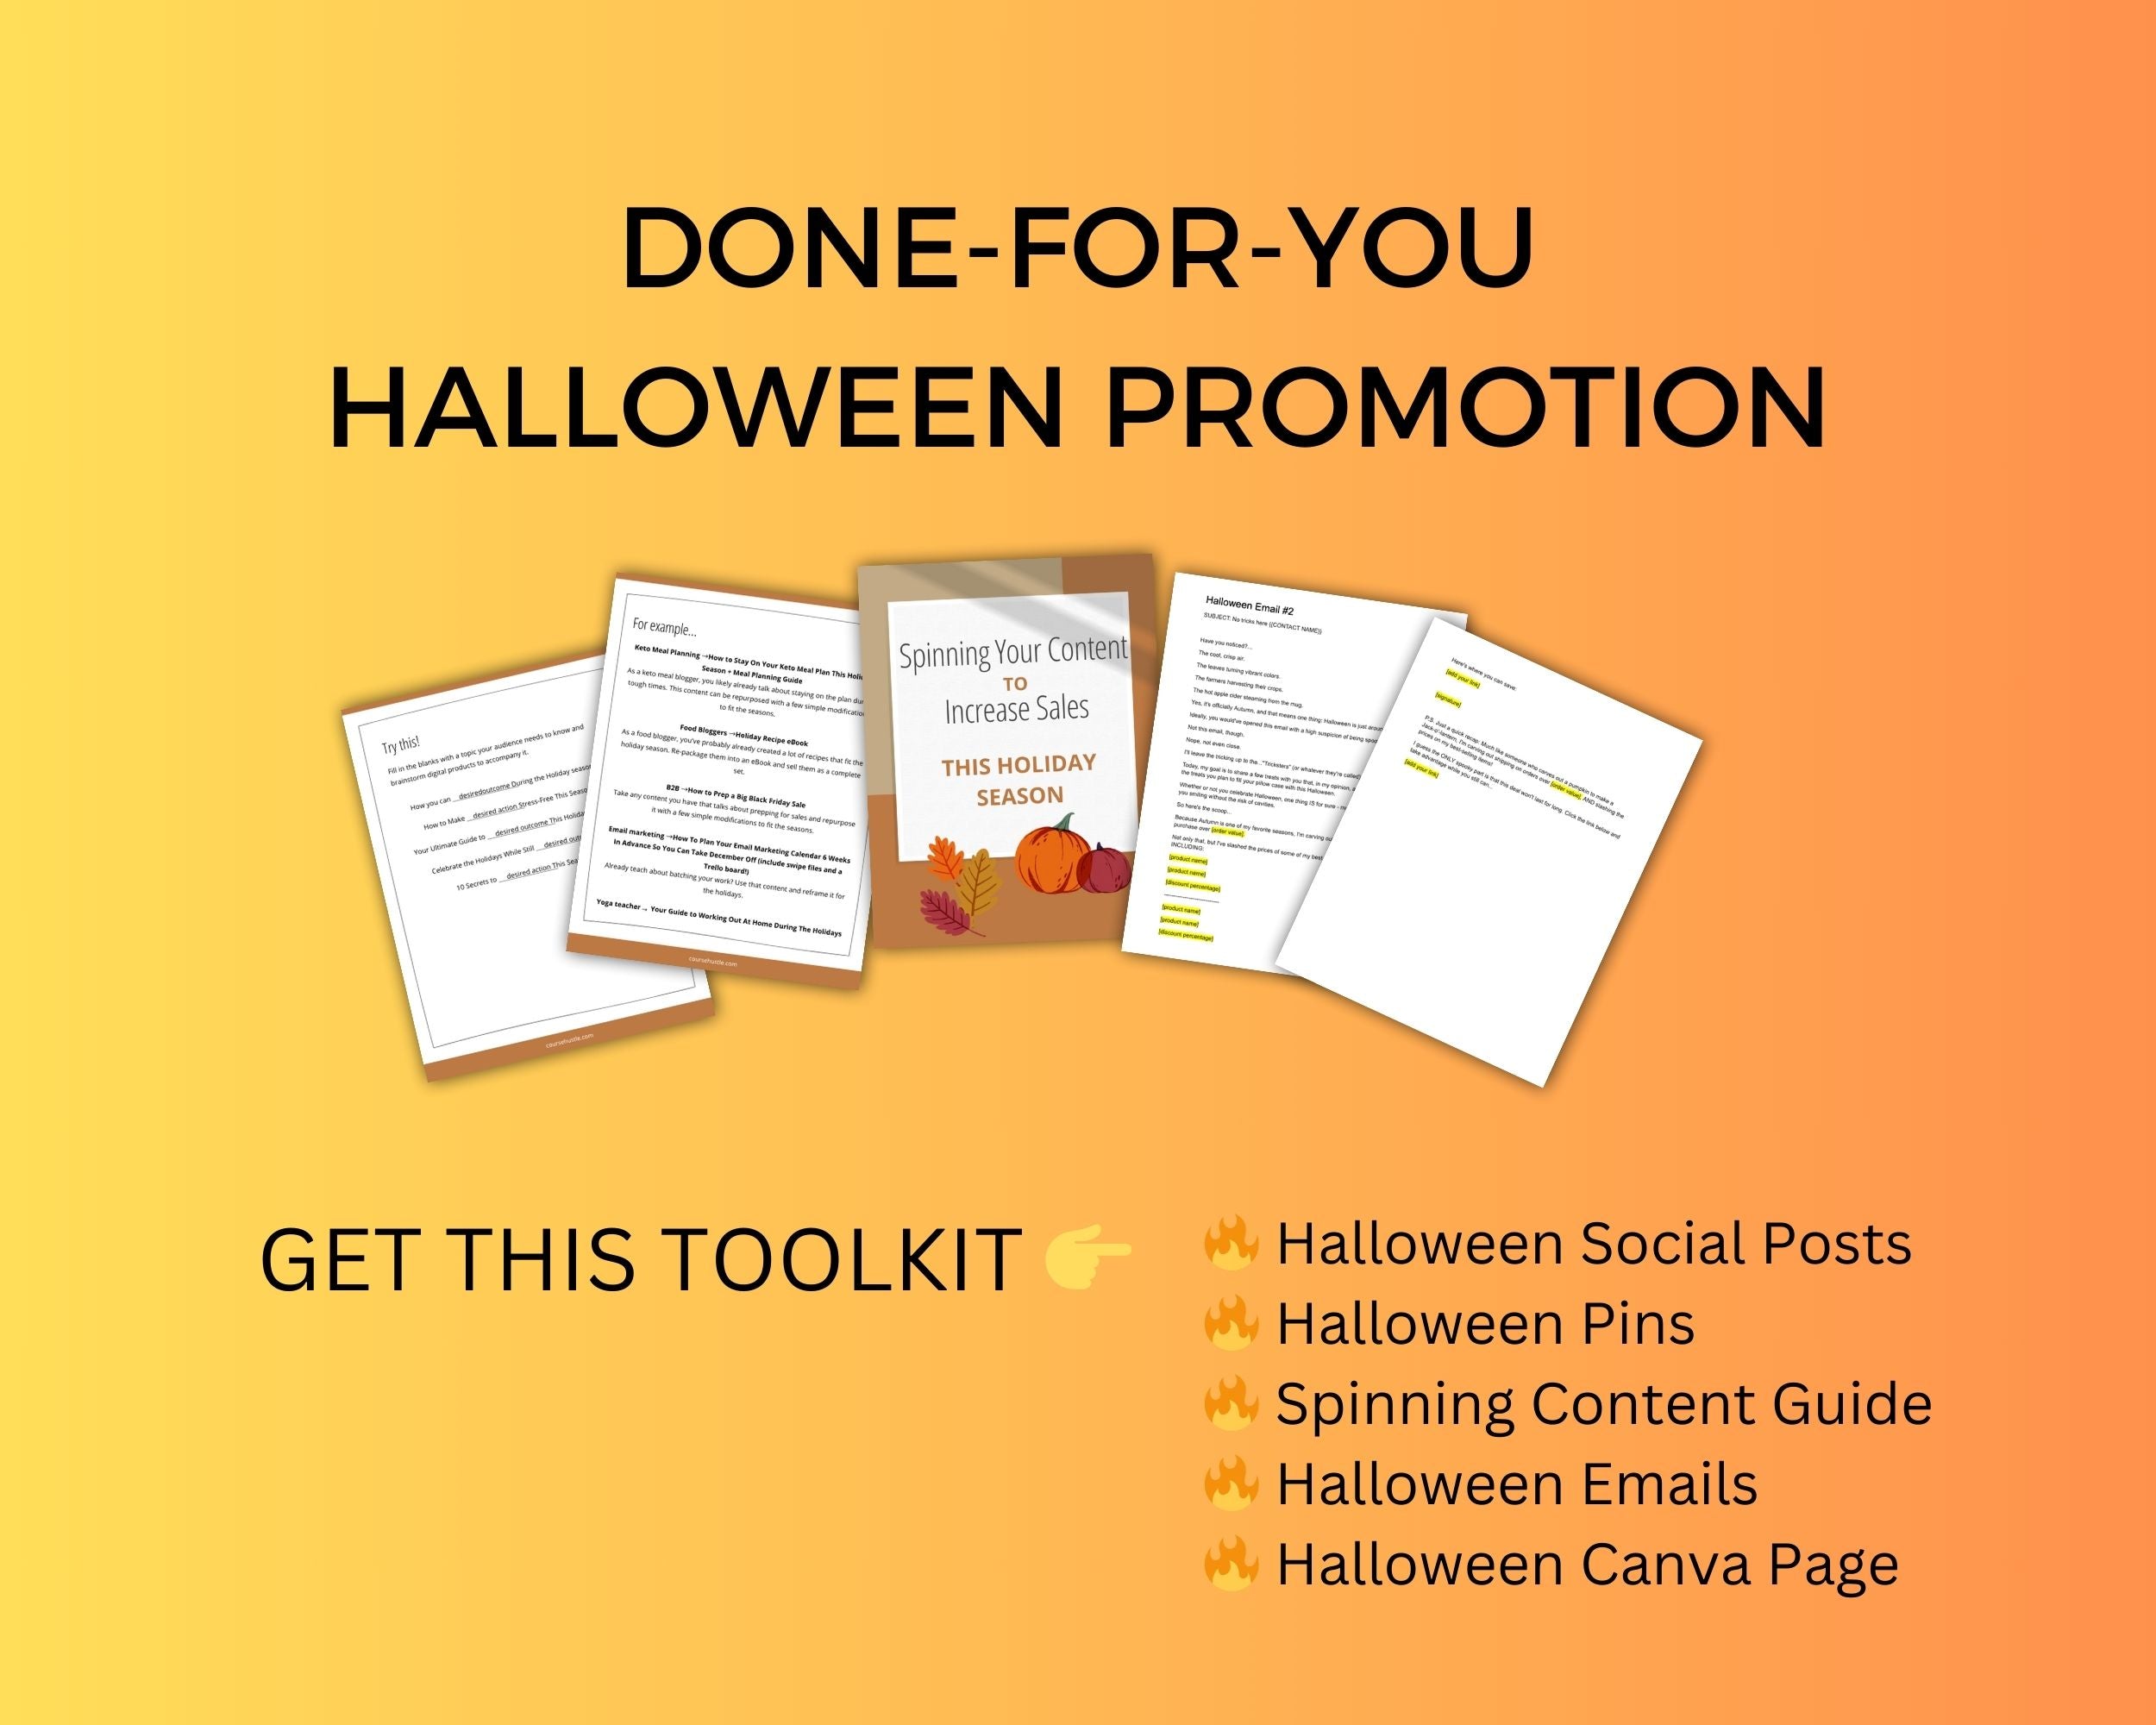 Halloween Camp Toolkit | Done For You Halloween Promotion | Course Creator Tools